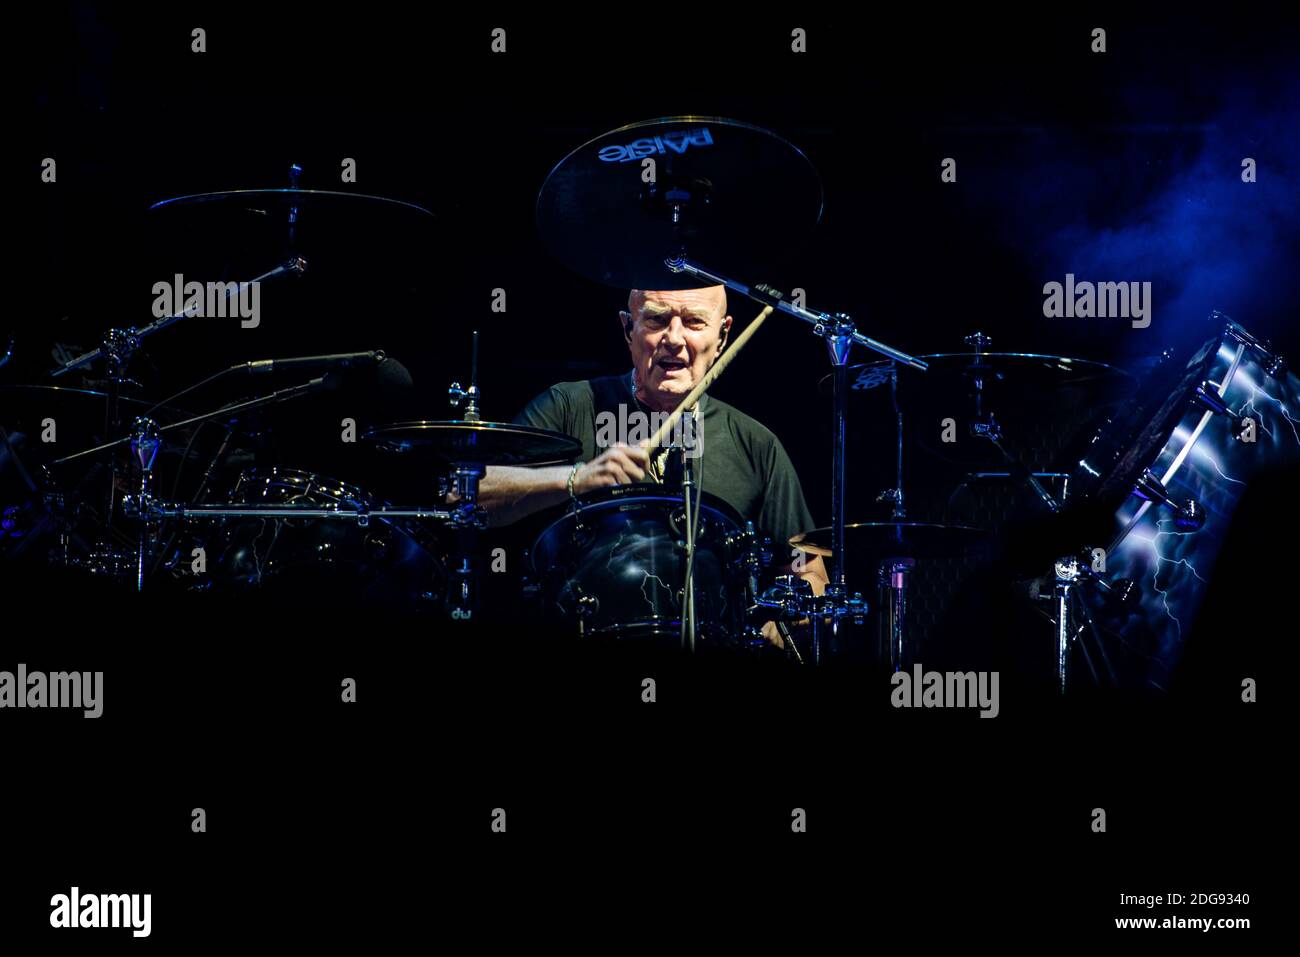 Chris Slade, of the Australian rock band AC/DC, performing live for the “Rock or Bust World Tour” at the Autodromo Enzo e Dino Ferrari of Imola, Italy Stock Photo